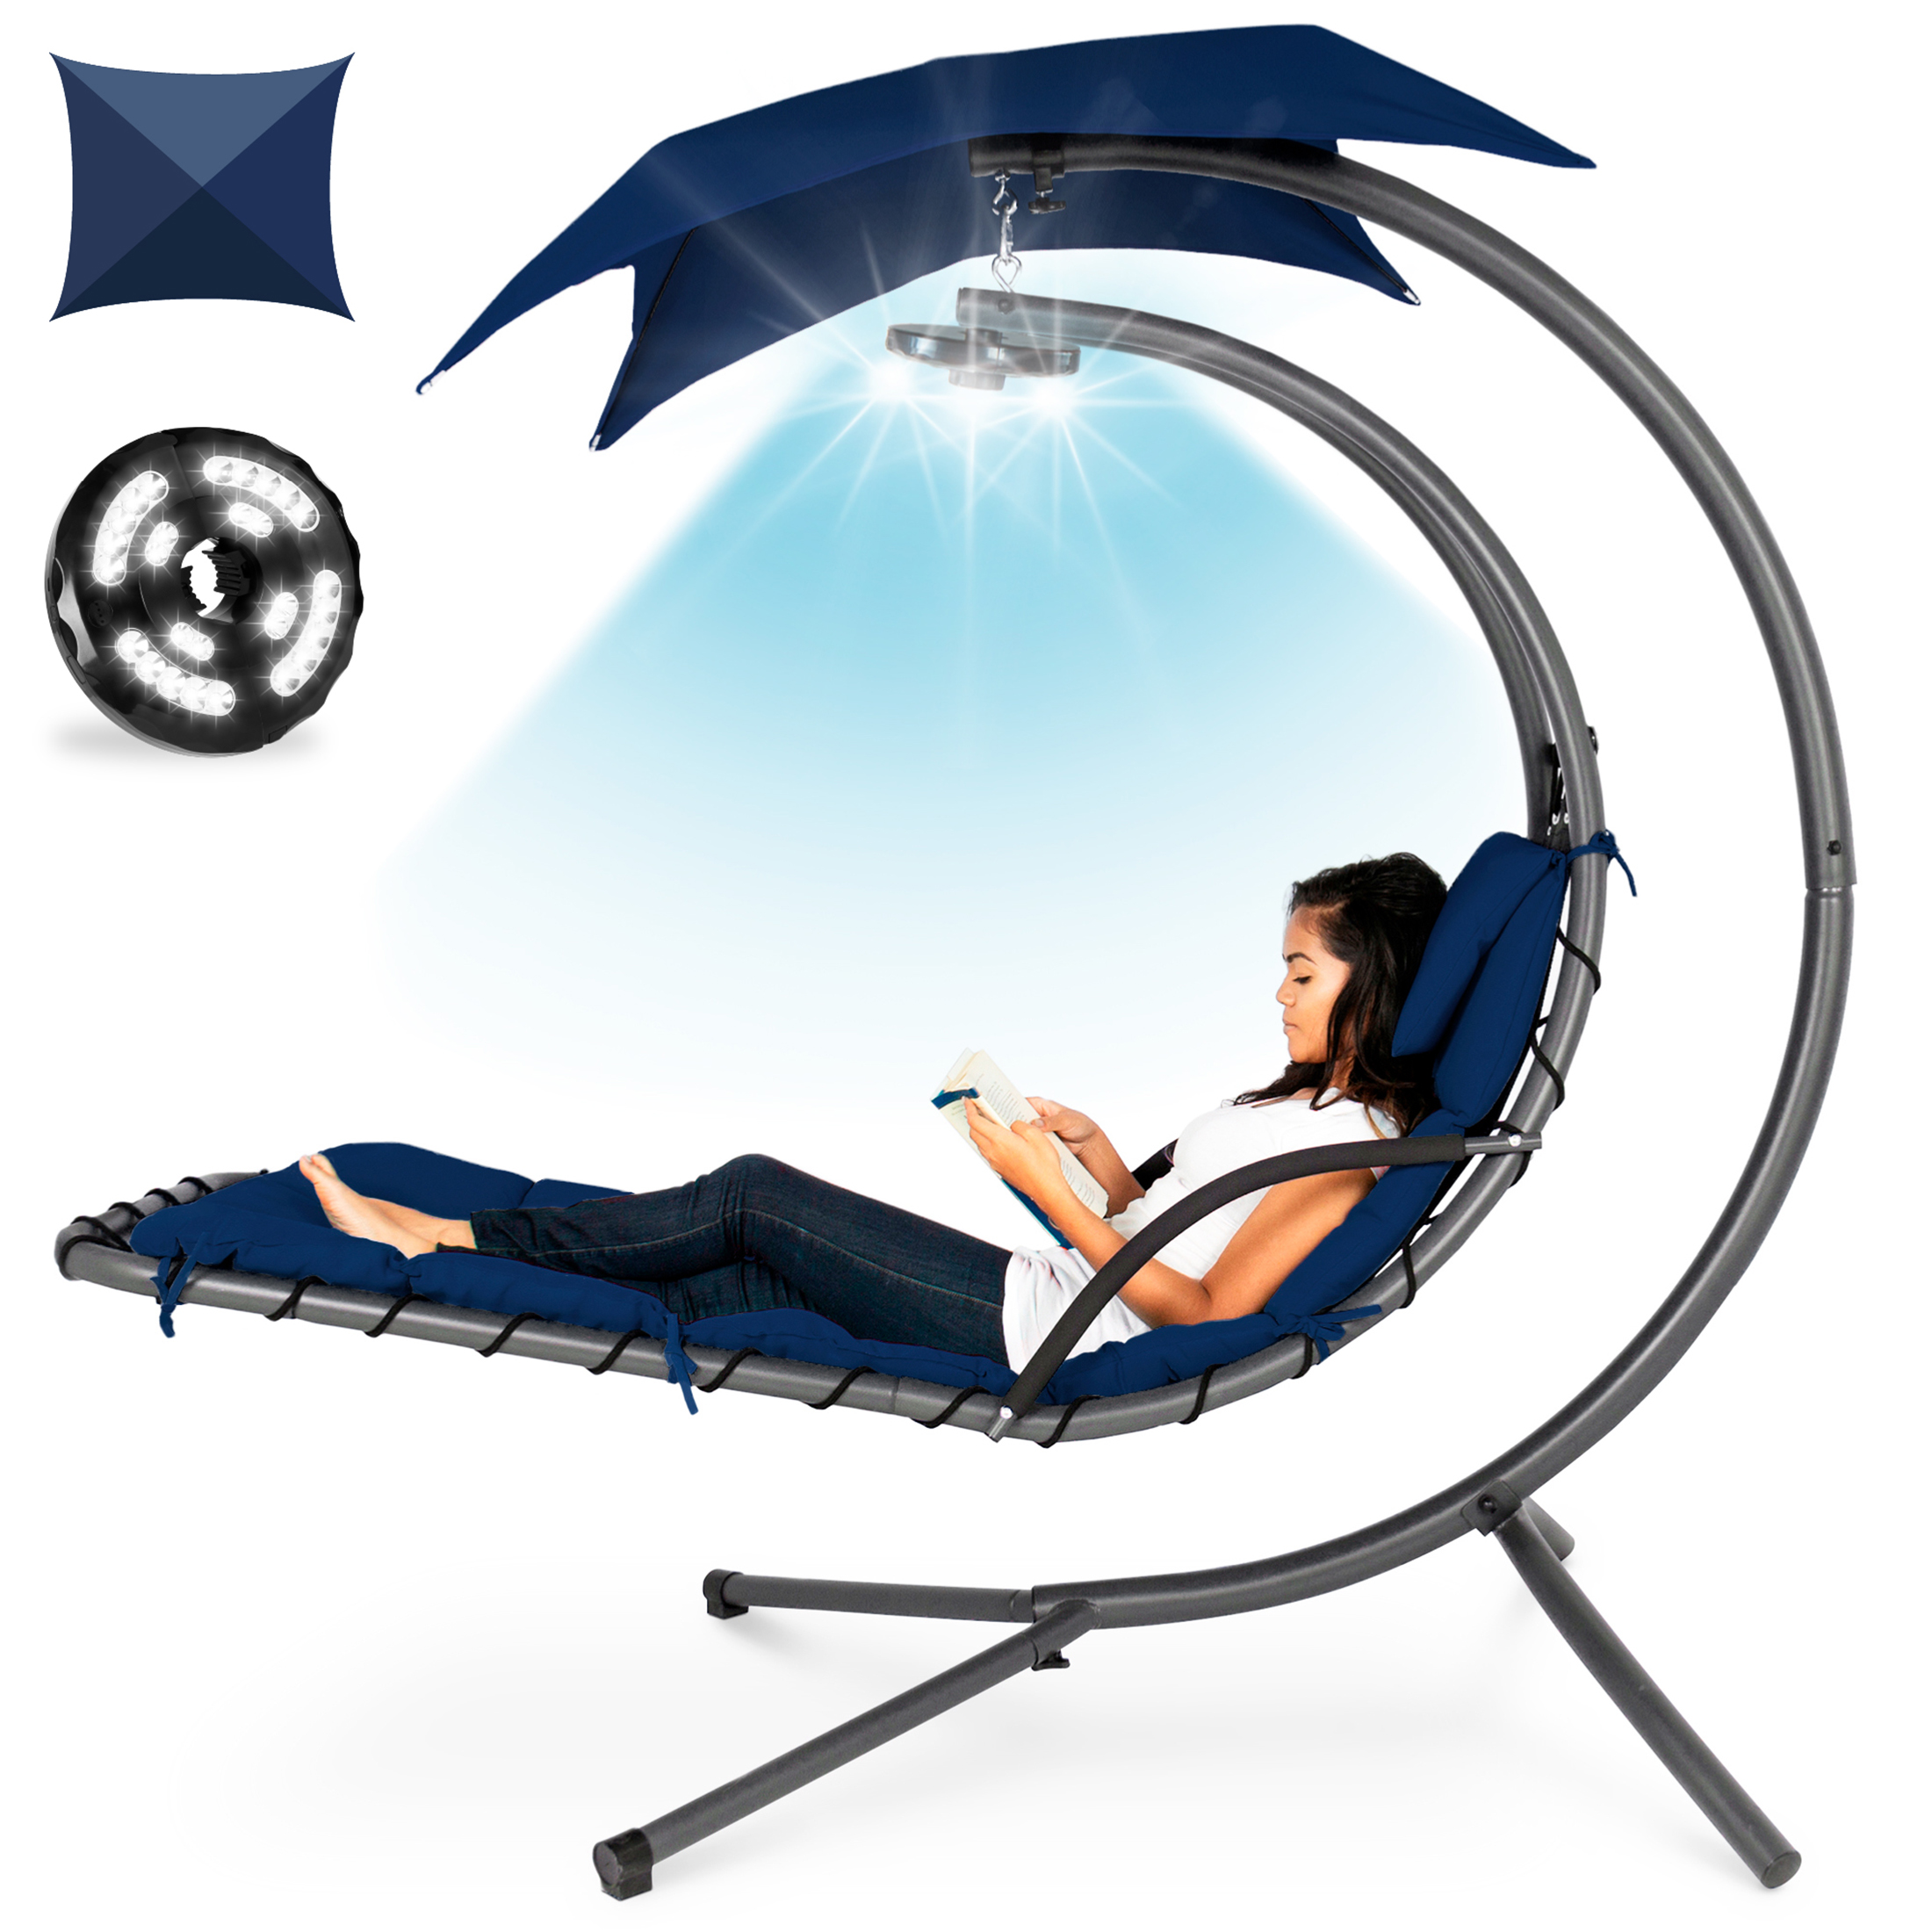 Best Choice Products Hanging LED-Lit Curved Chaise Lounge Chair for Backyard, Patio w/ Pillow, Canopy, Stand - Navy - image 1 of 7